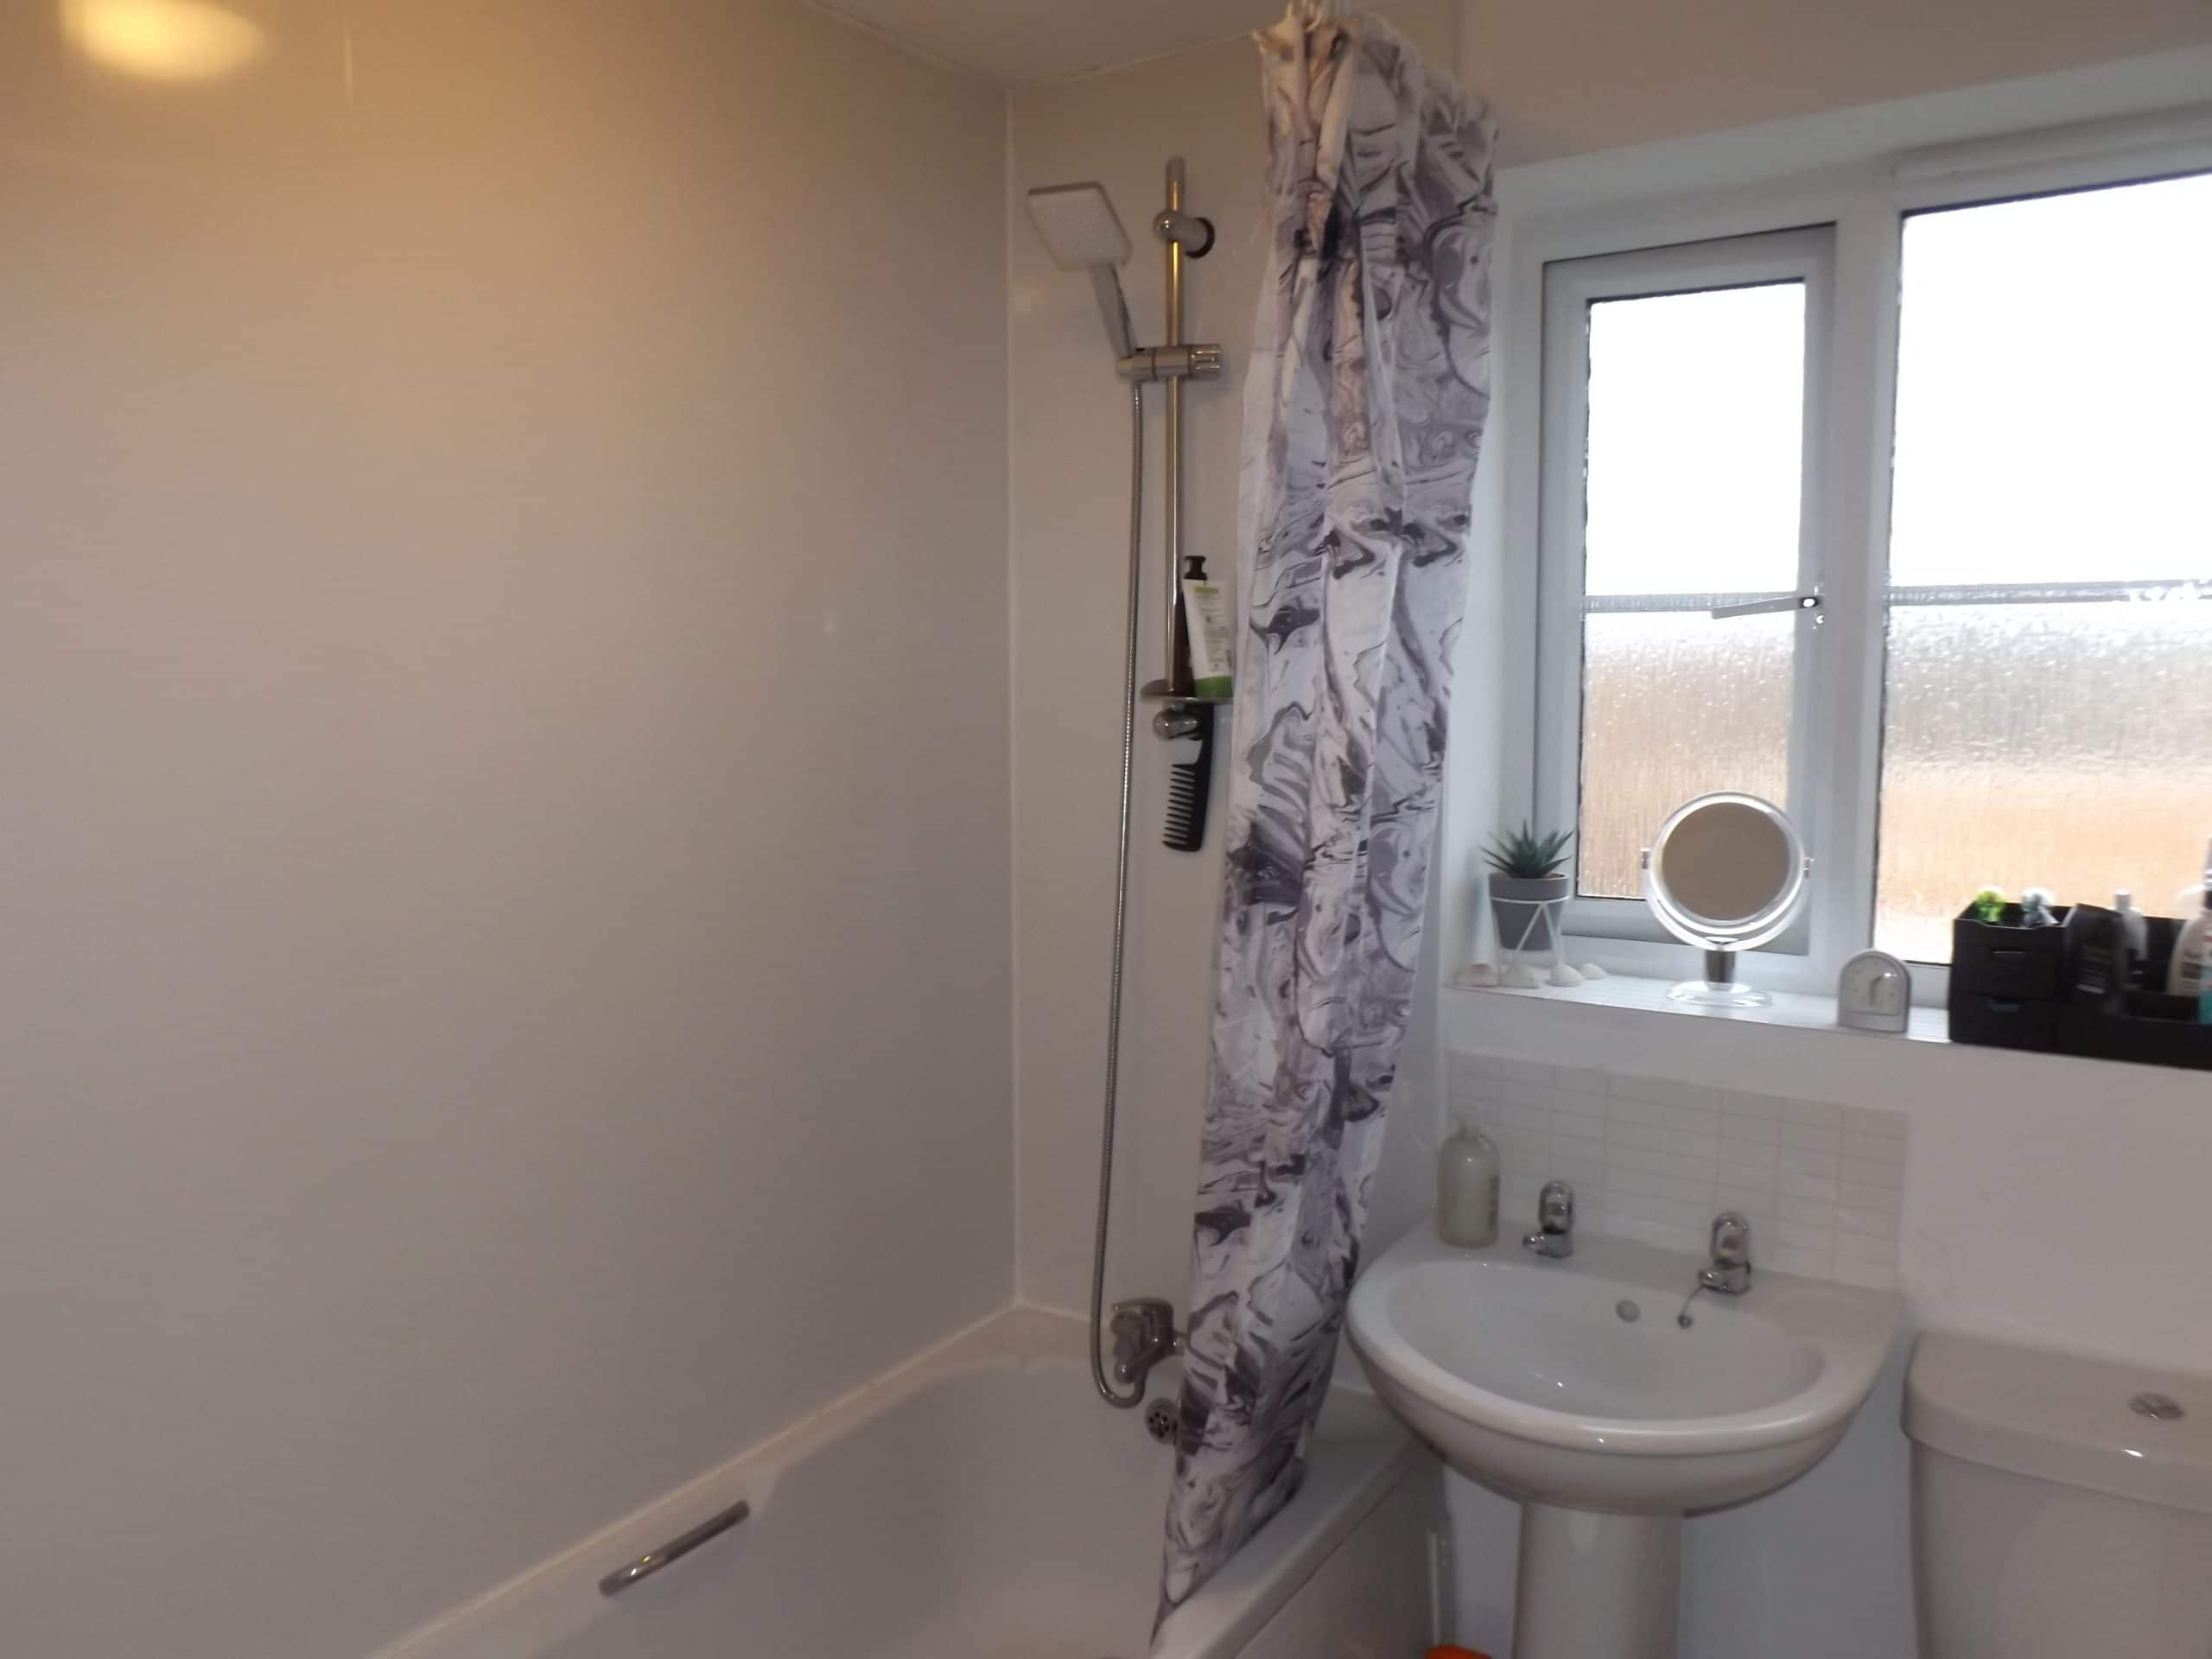 image of bathroom with curtain